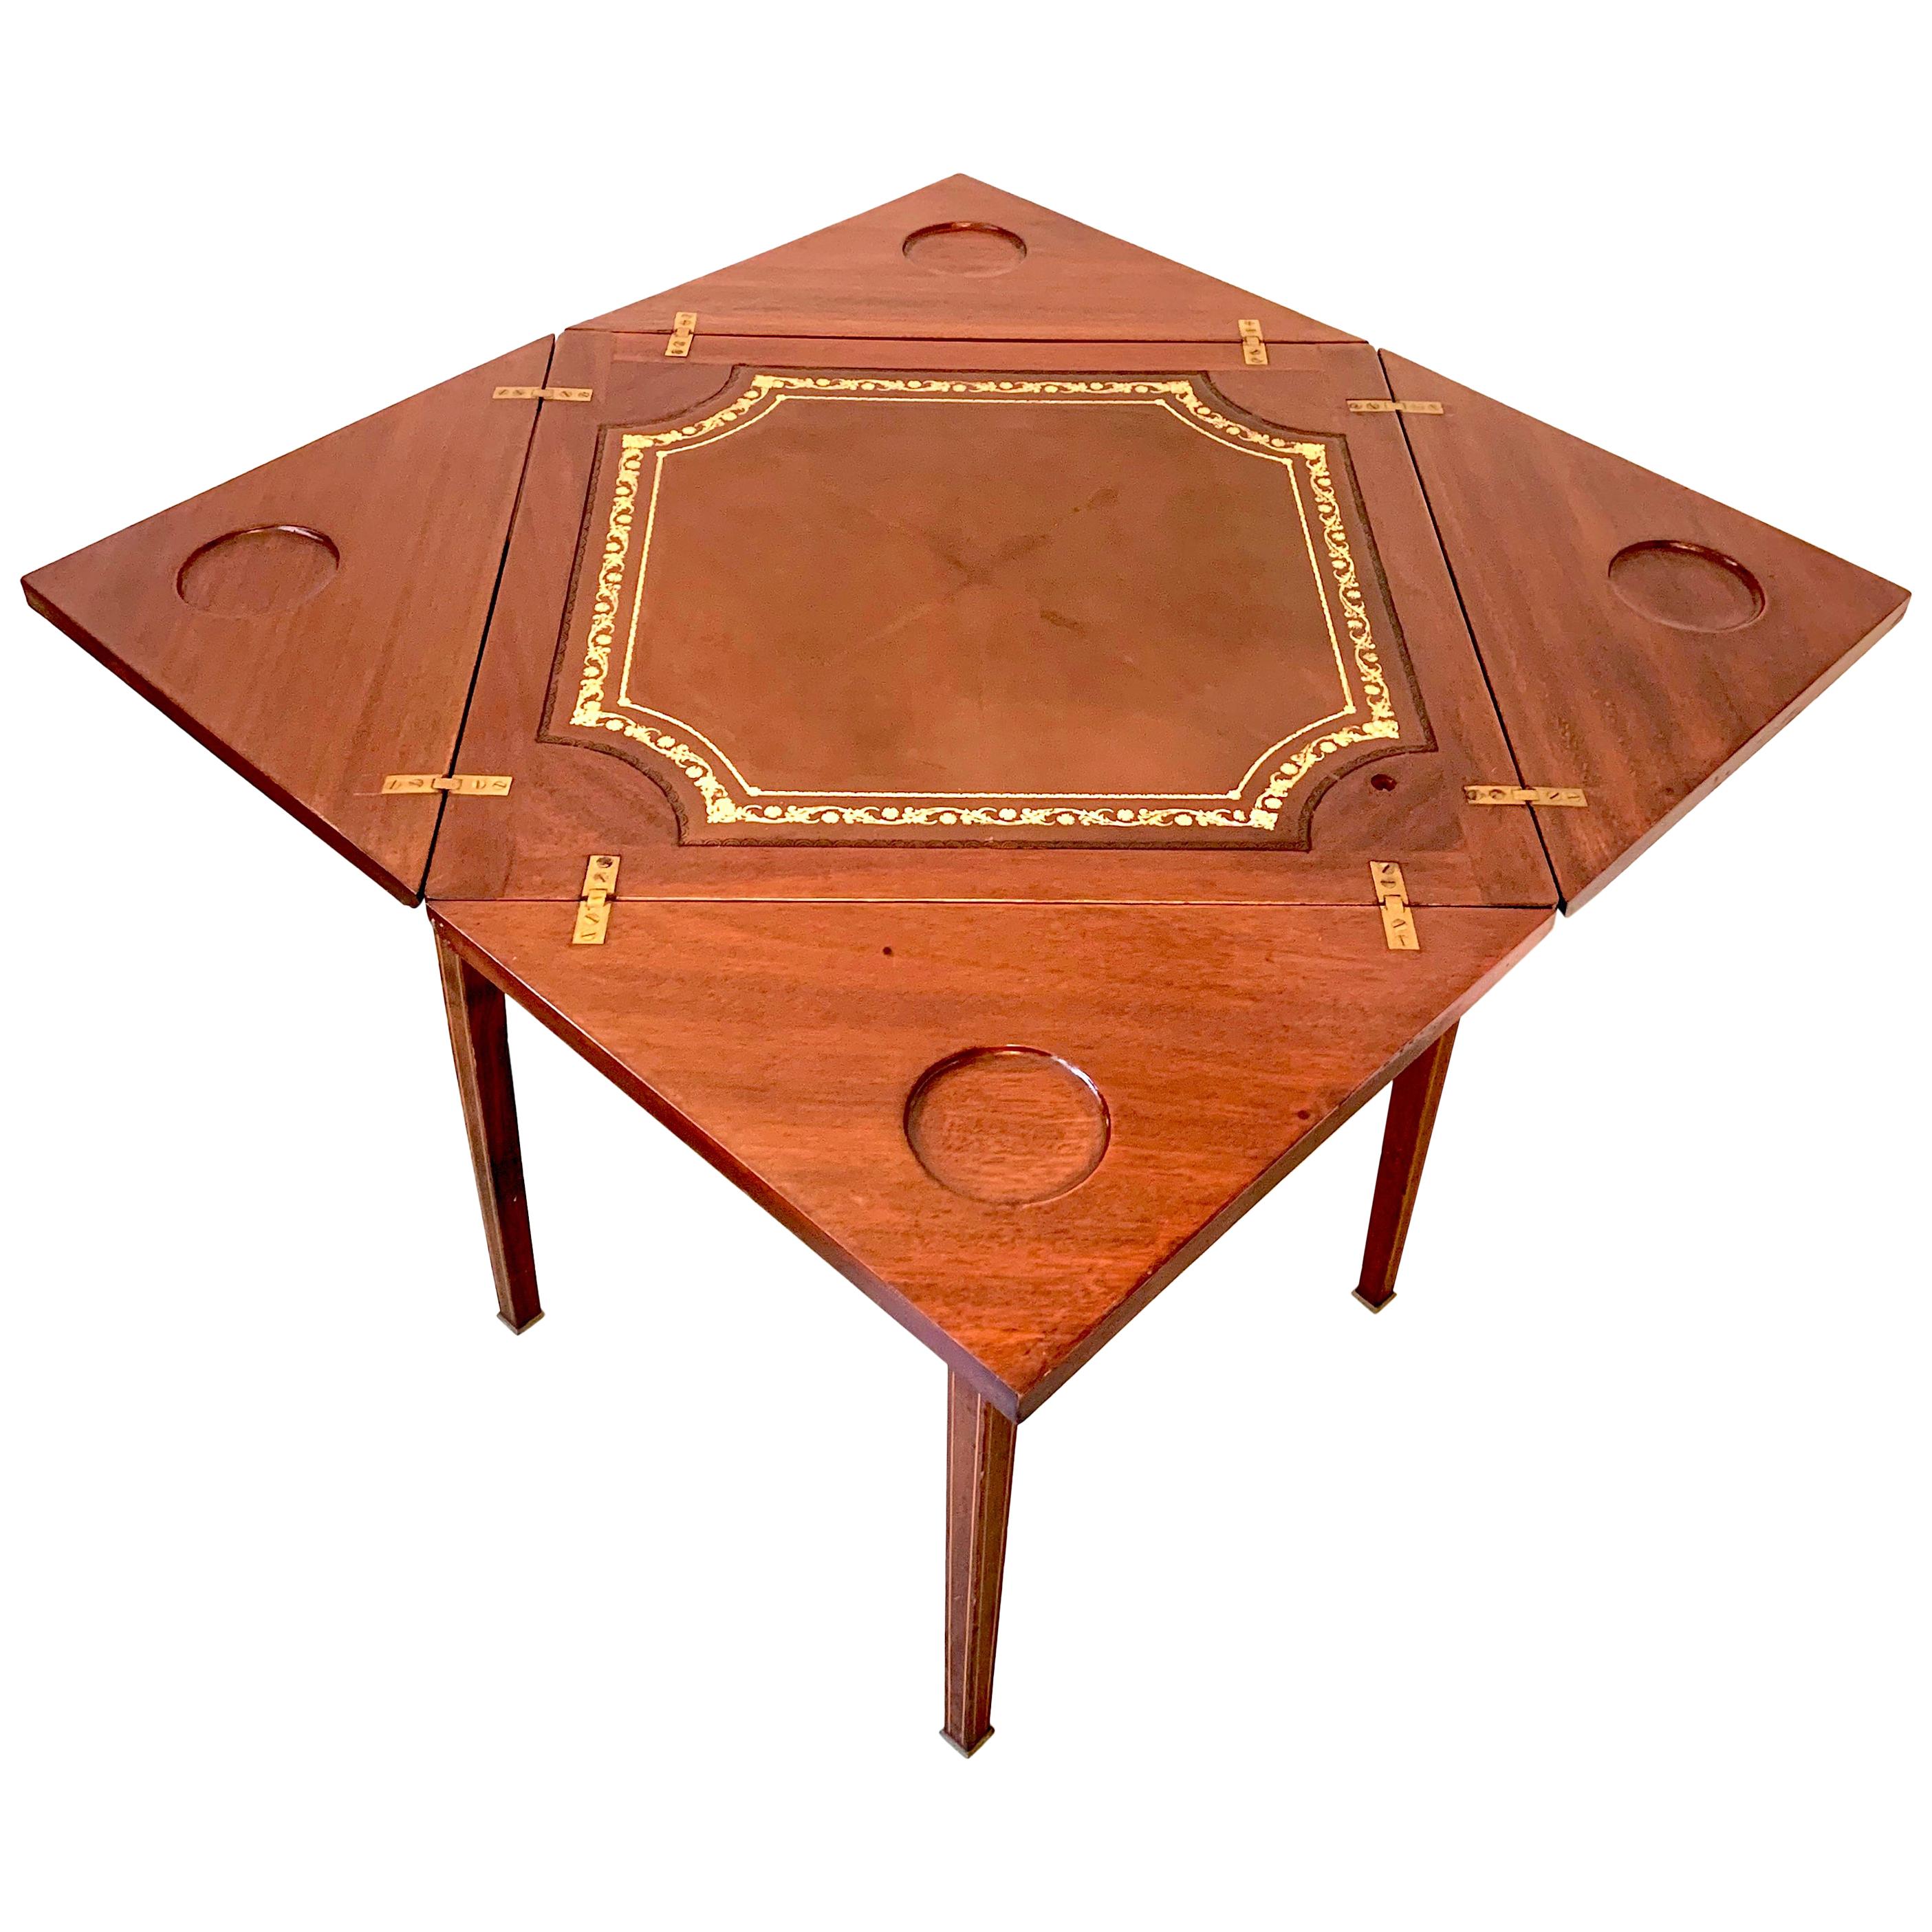 19th Century Unique Wooden Card Table with Envelope Top For Sale